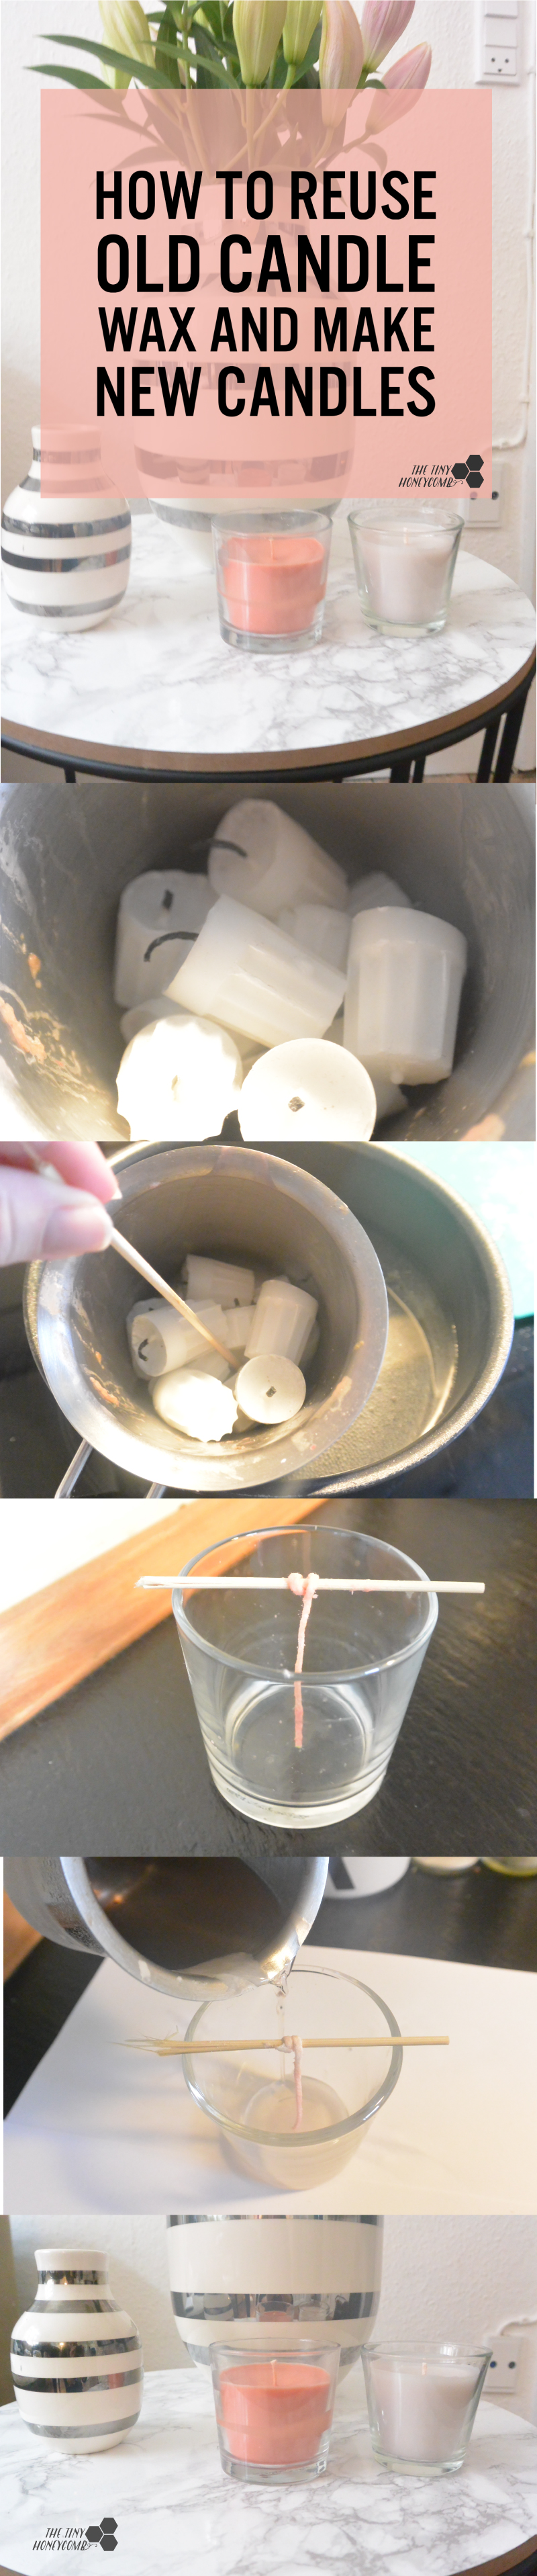 How to reuse old candle wax and make new candles